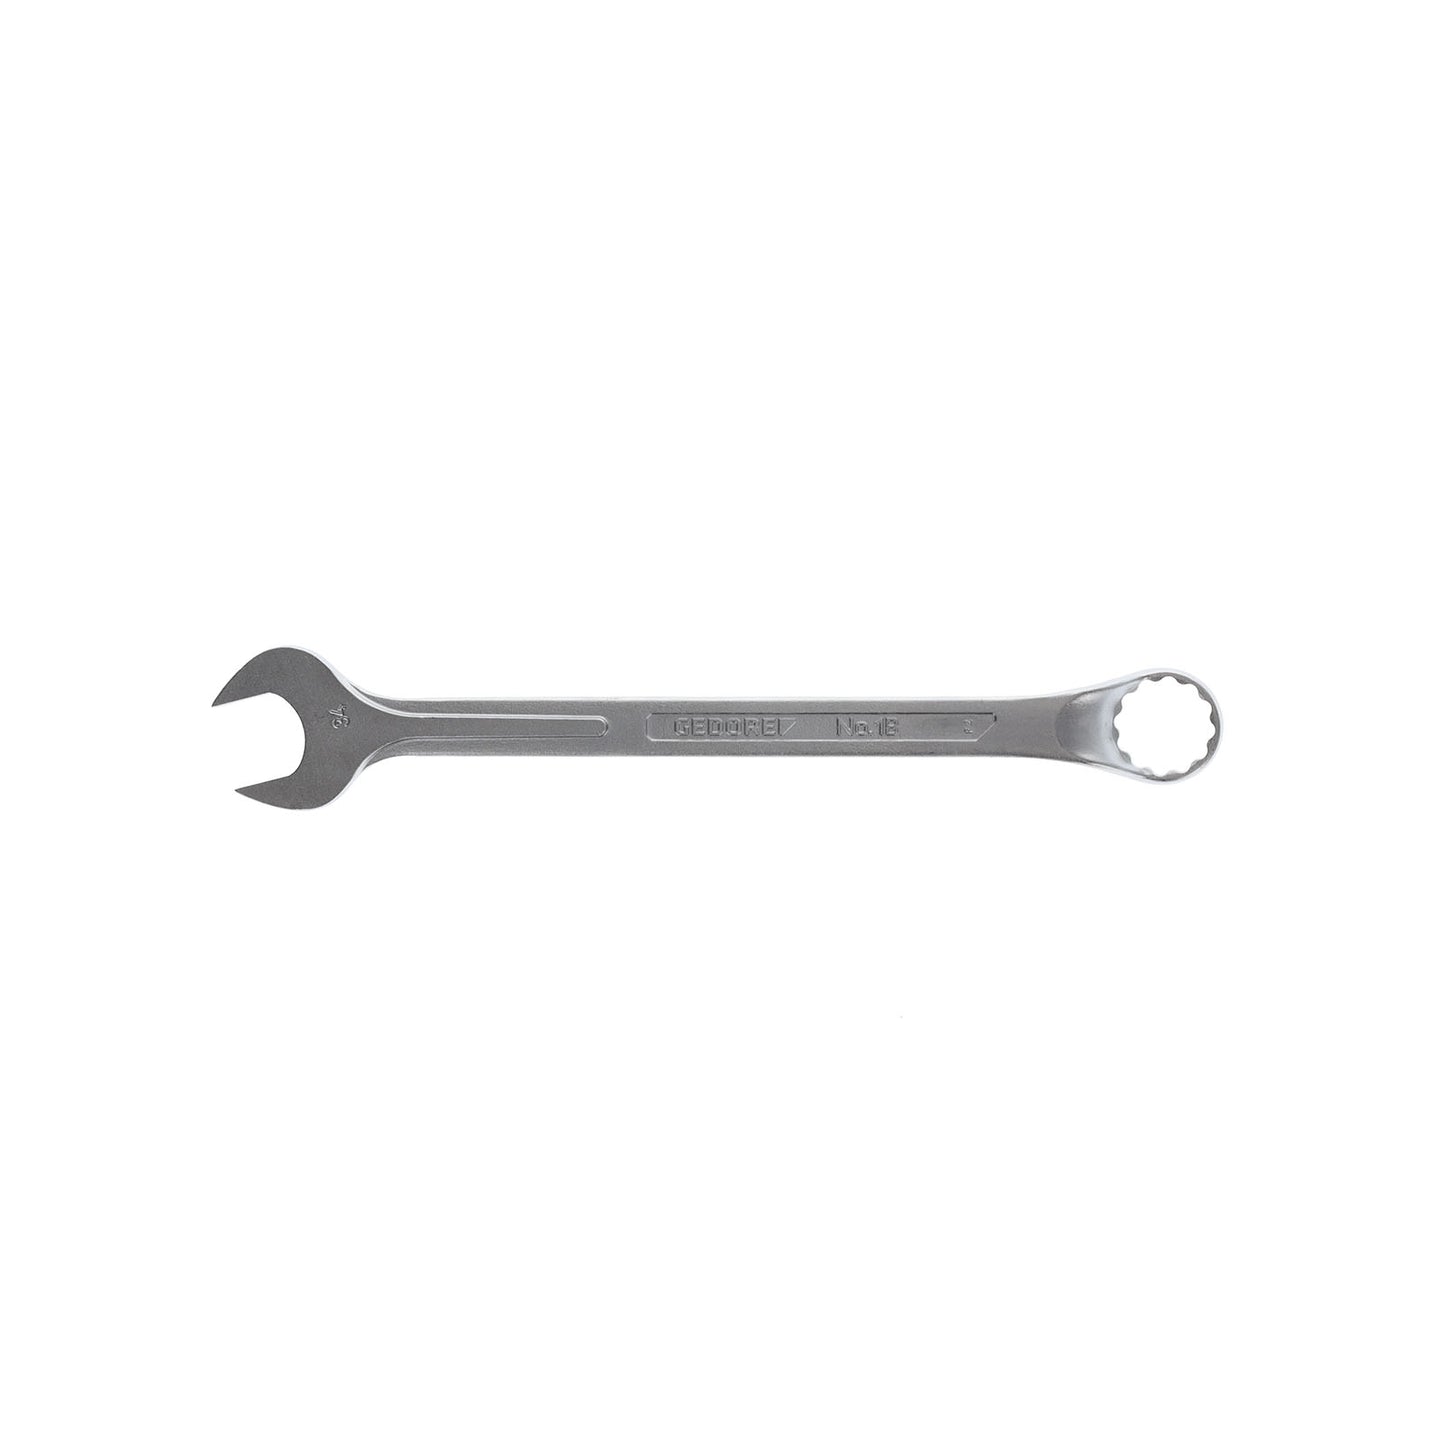 GEDORE 1 B 34 - Offset Combination Wrench, 34mm (6004150)